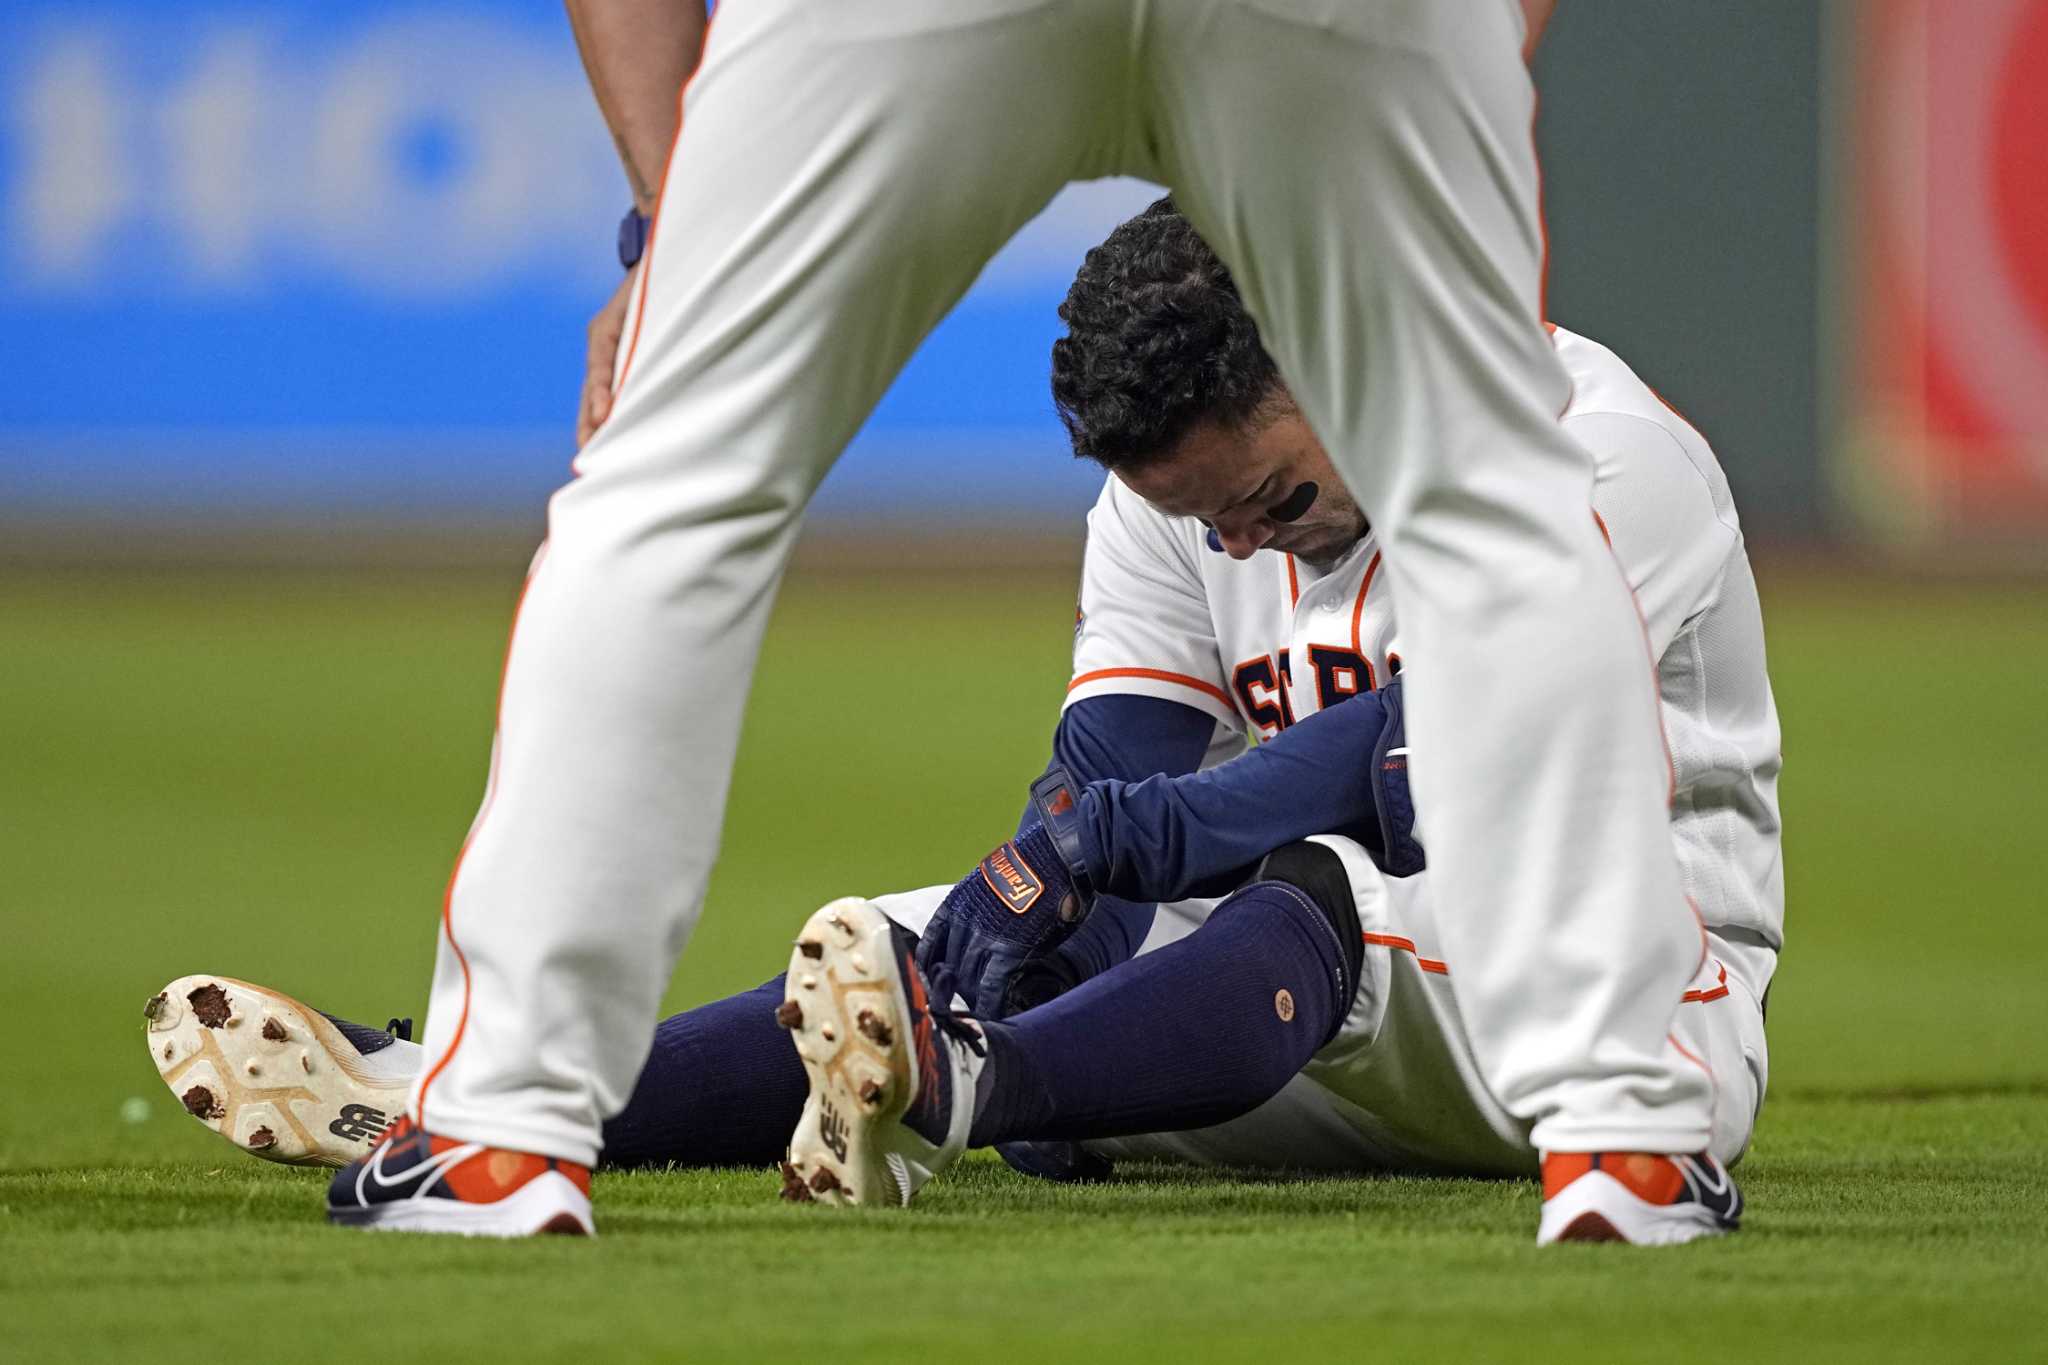 Houston Astros placed Jeremy Peña on 10-day injured list for left thumb  discomfort, J.J. Matijevic recalled to take his place - ABC13 Houston